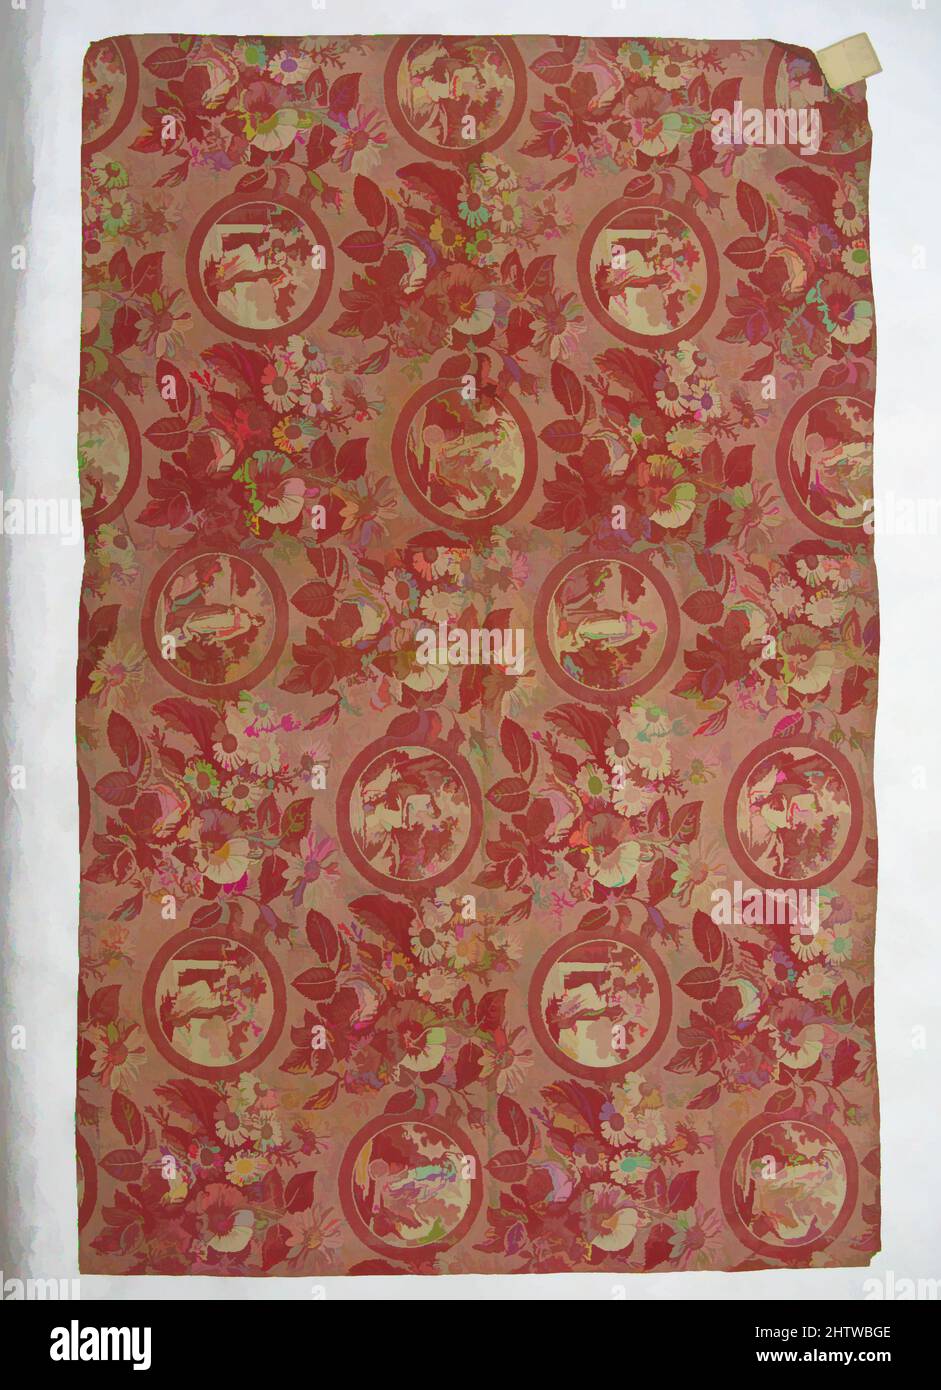 Art inspired by Allegories of Love, first quarter 19th century, French, Cotton, Overall: 34 x 53 1/2 in. (86.4 x 135.9 cm), Textiles-Printed, Classic works modernized by Artotop with a splash of modernity. Shapes, color and value, eye-catching visual impact on art. Emotions through freedom of artworks in a contemporary way. A timeless message pursuing a wildly creative new direction. Artists turning to the digital medium and creating the Artotop NFT Stock Photo